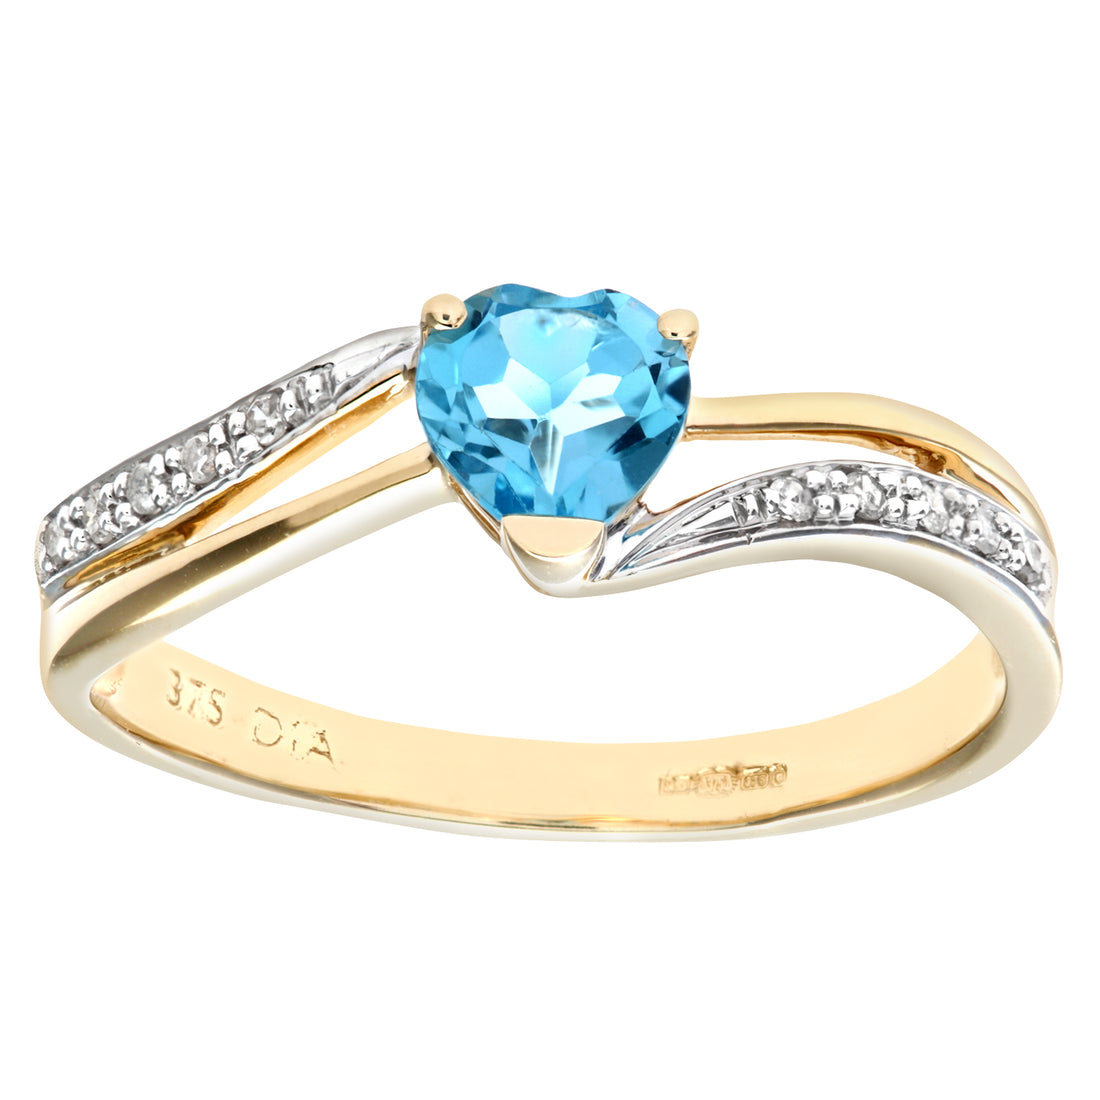 Ladies 9ct Yellow Gold Diamond and Heart Blue Topaz Ring